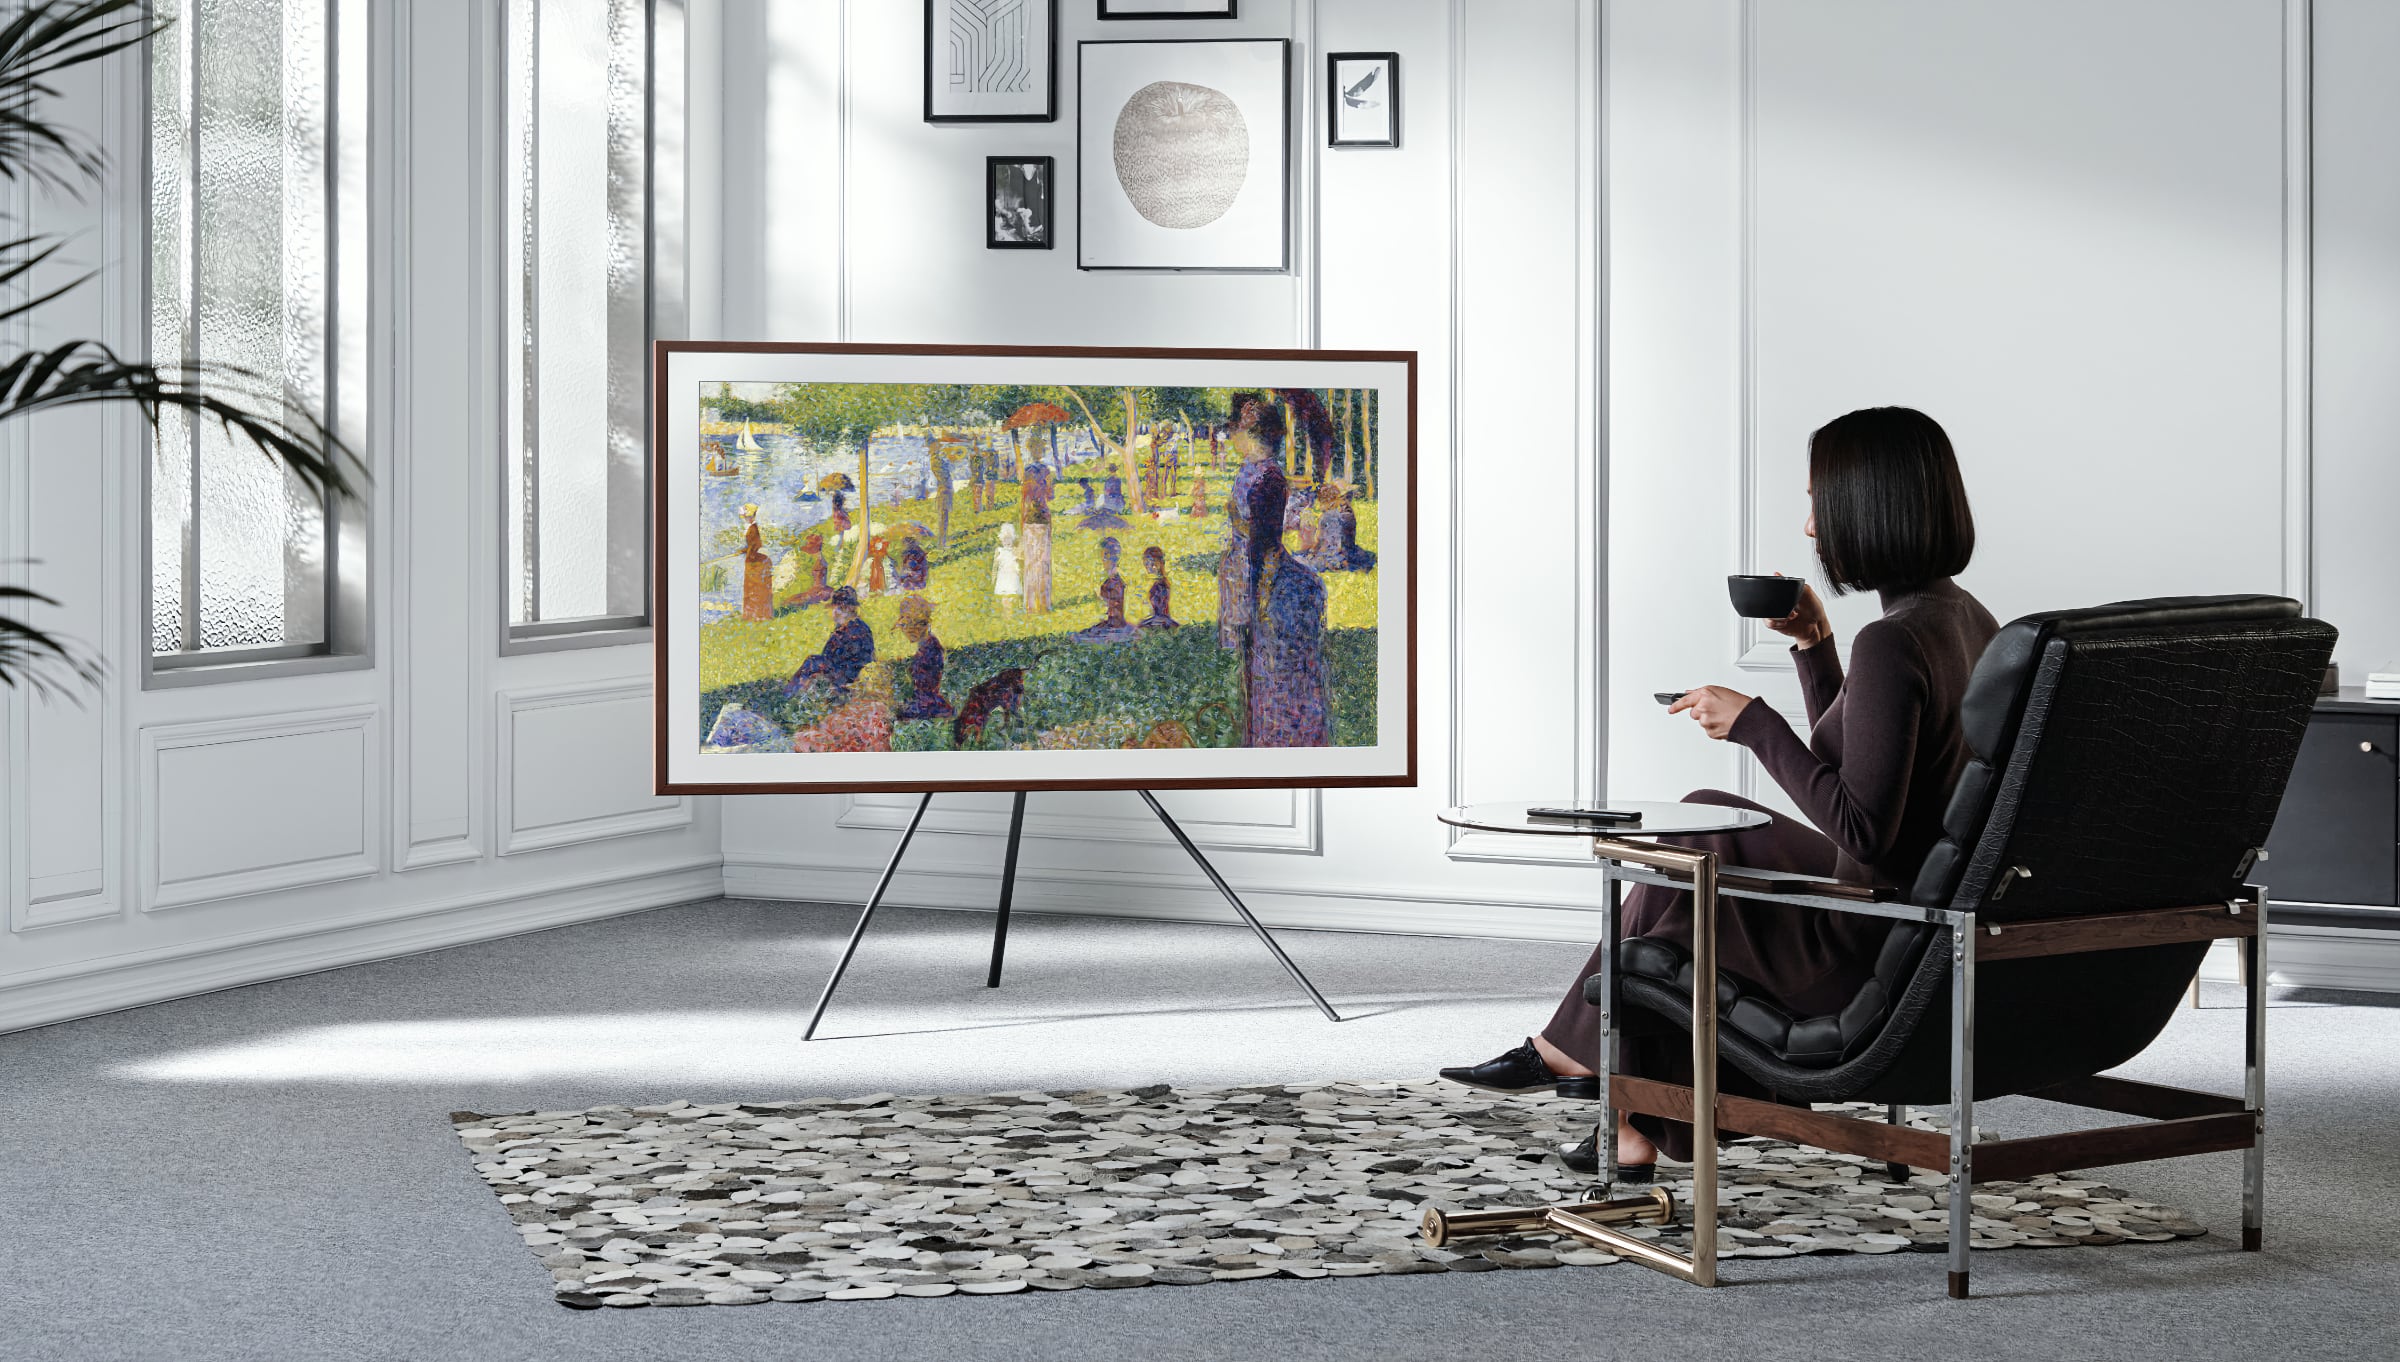 Samsung: Total sales of 'The Frame' to exceed 2 million by year's end -  FlatpanelsHD